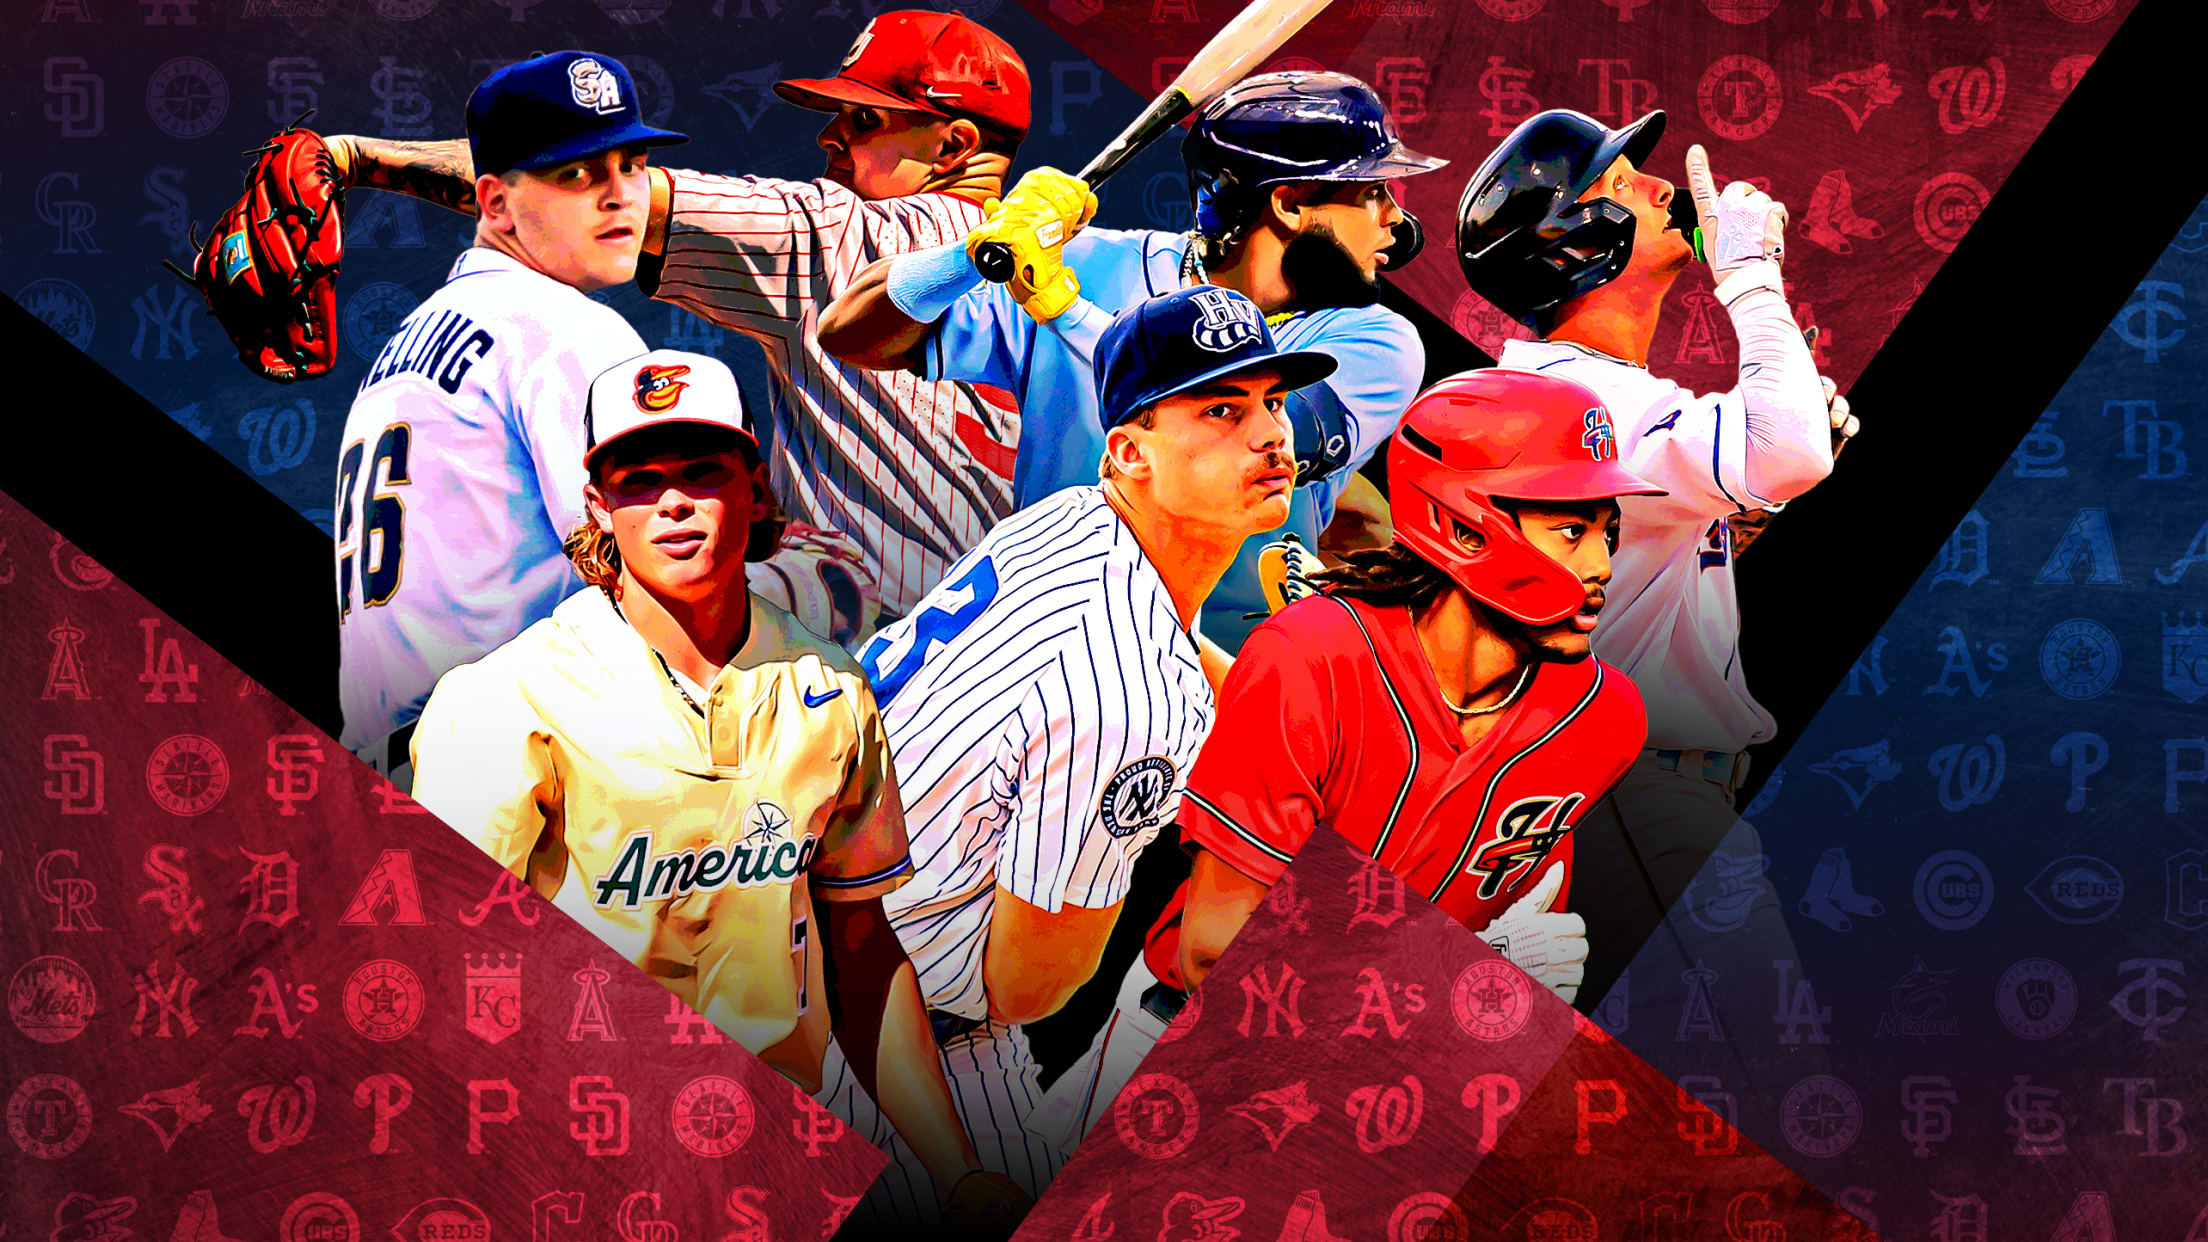 A photo illustration of 7 top prospects